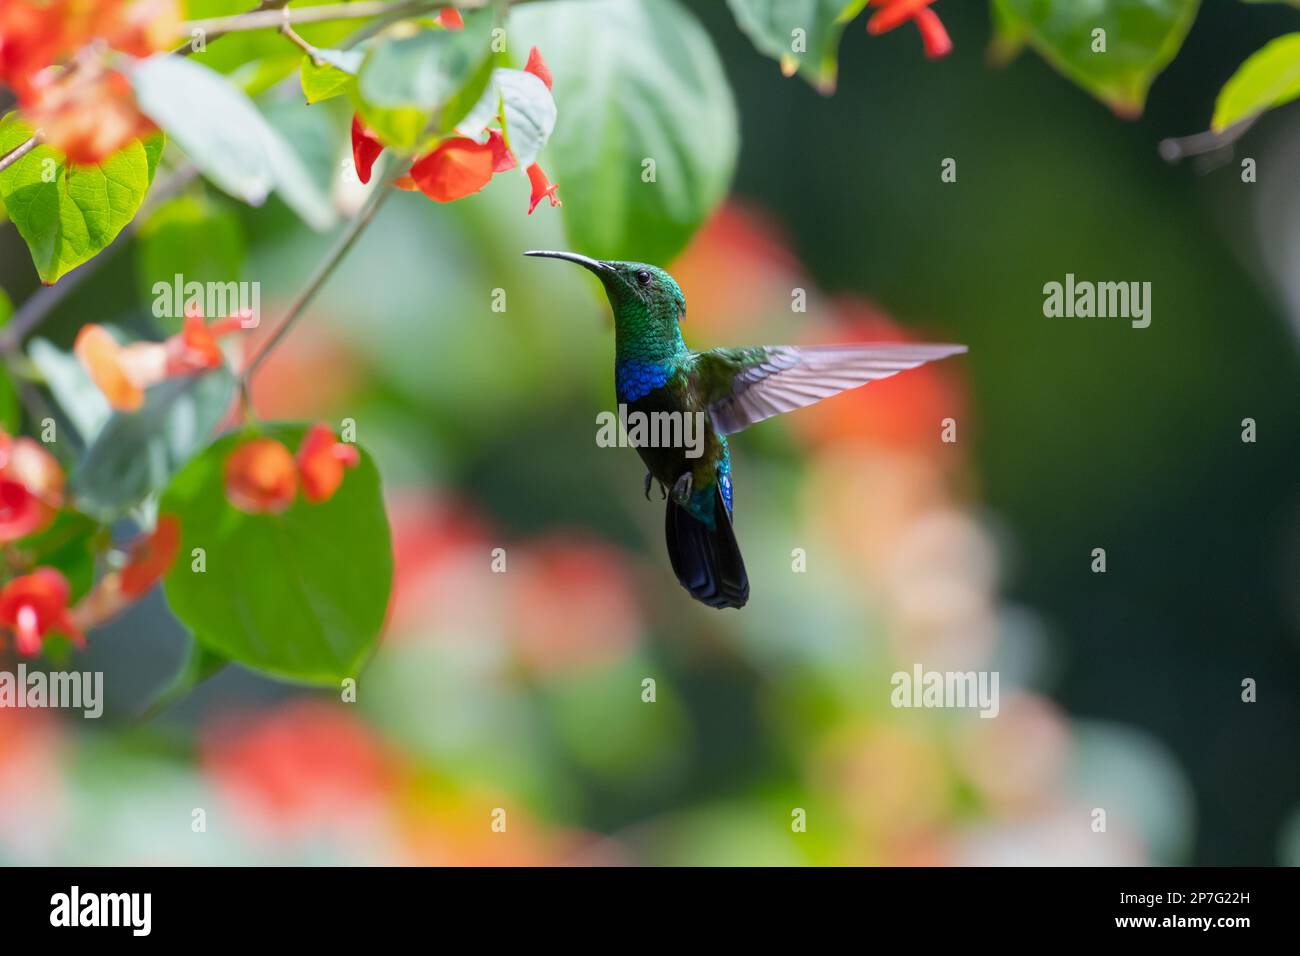 Green-throated Carib hummingbird flying next to tropical flowers in a botanical garden in the Caribbean. Stock Photo